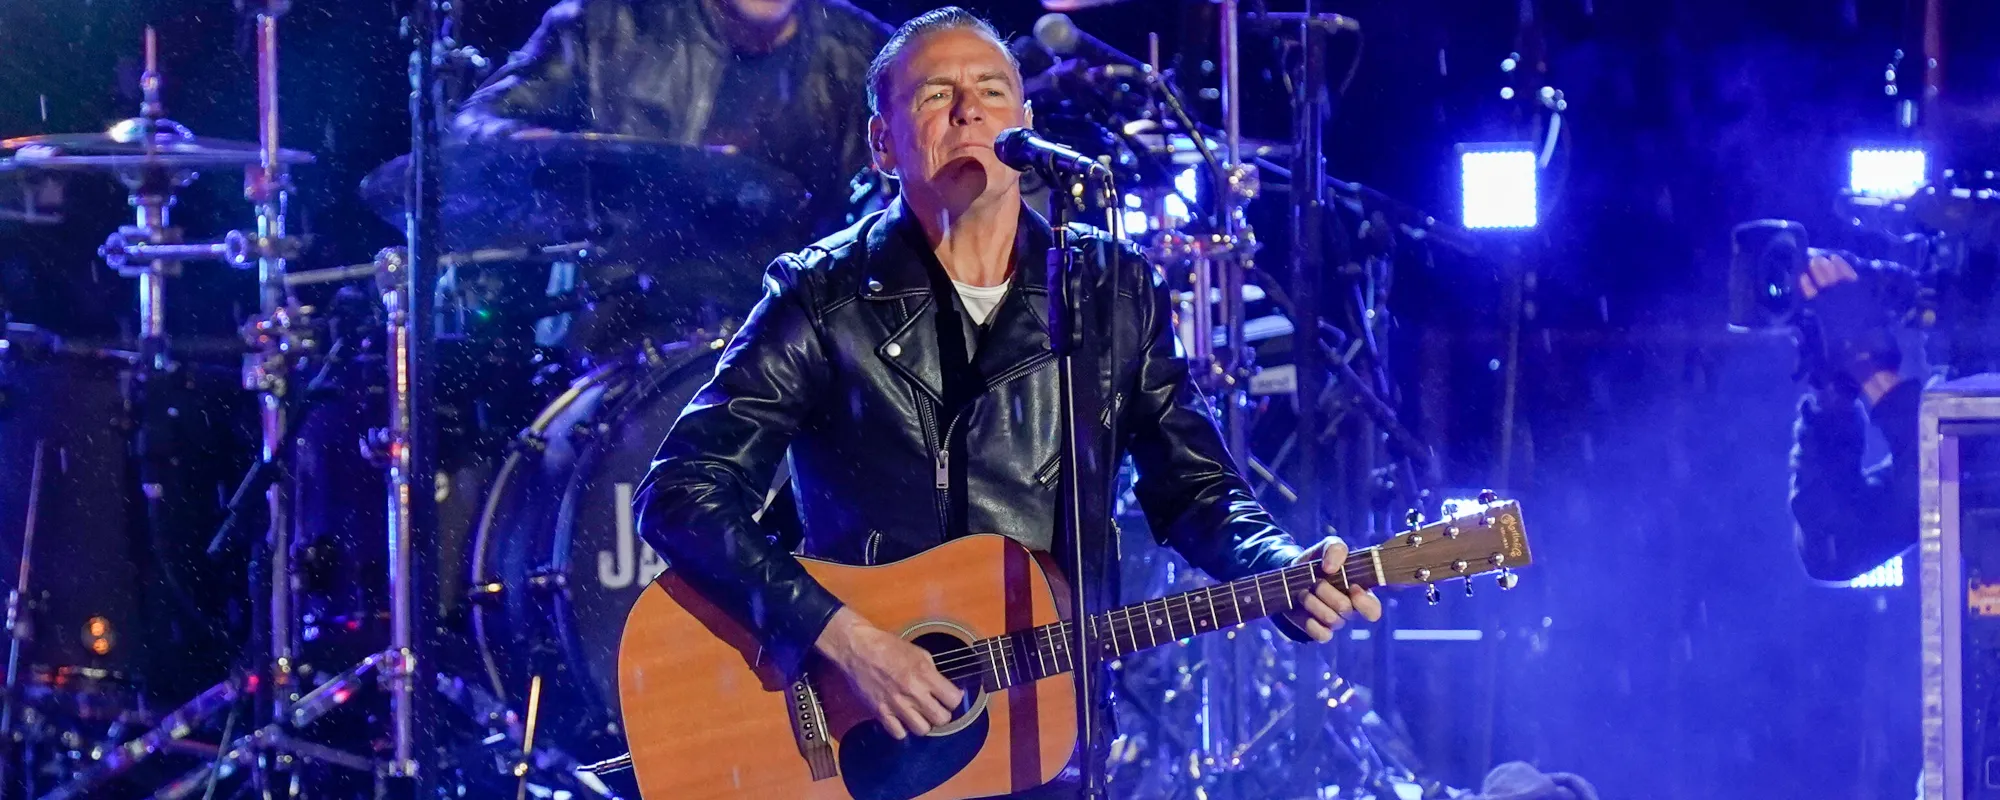 5 Songs You Didn’t Know Bryan Adams Co-Wrote for Other Artists